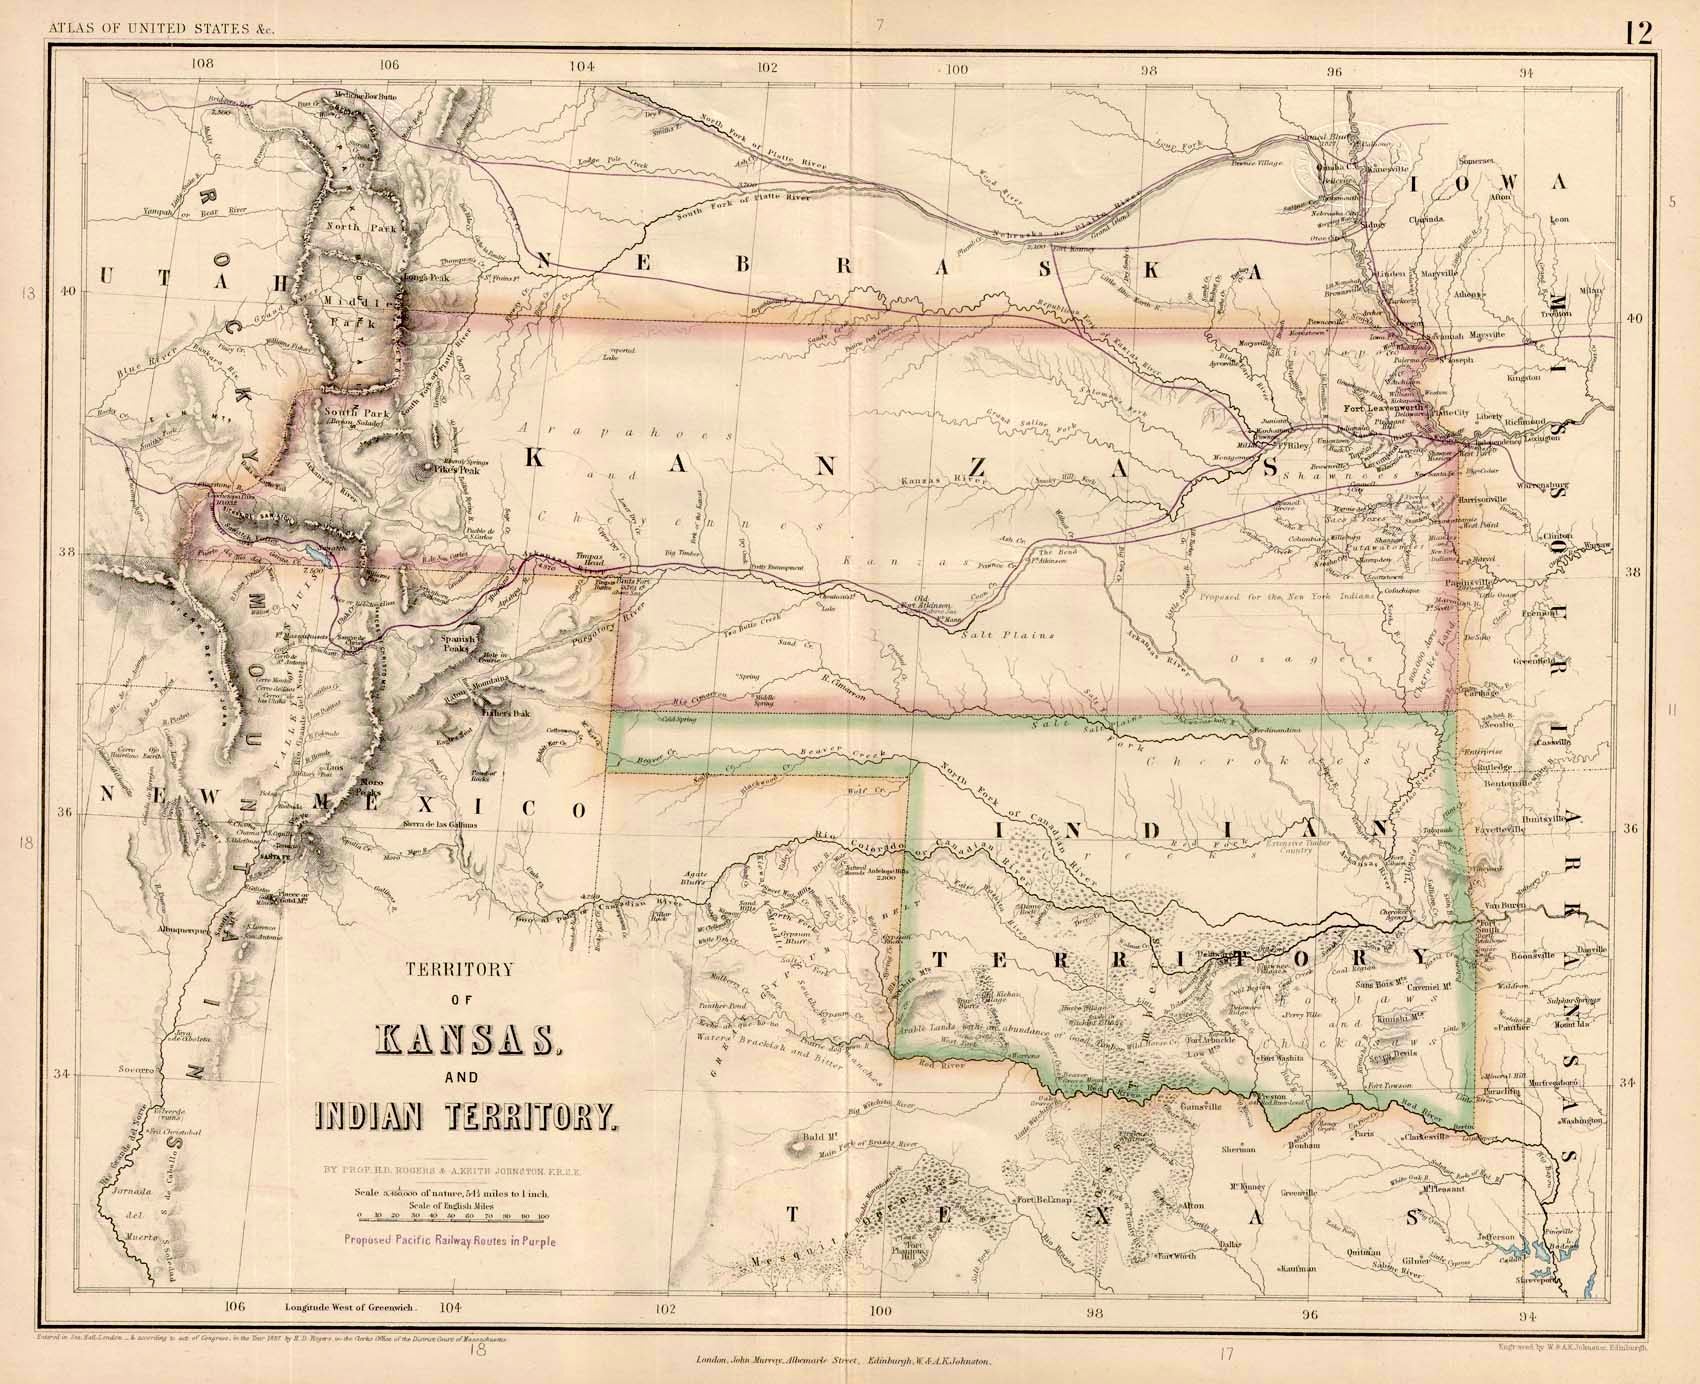 (West) Territory of Kansas and Indian Territory.